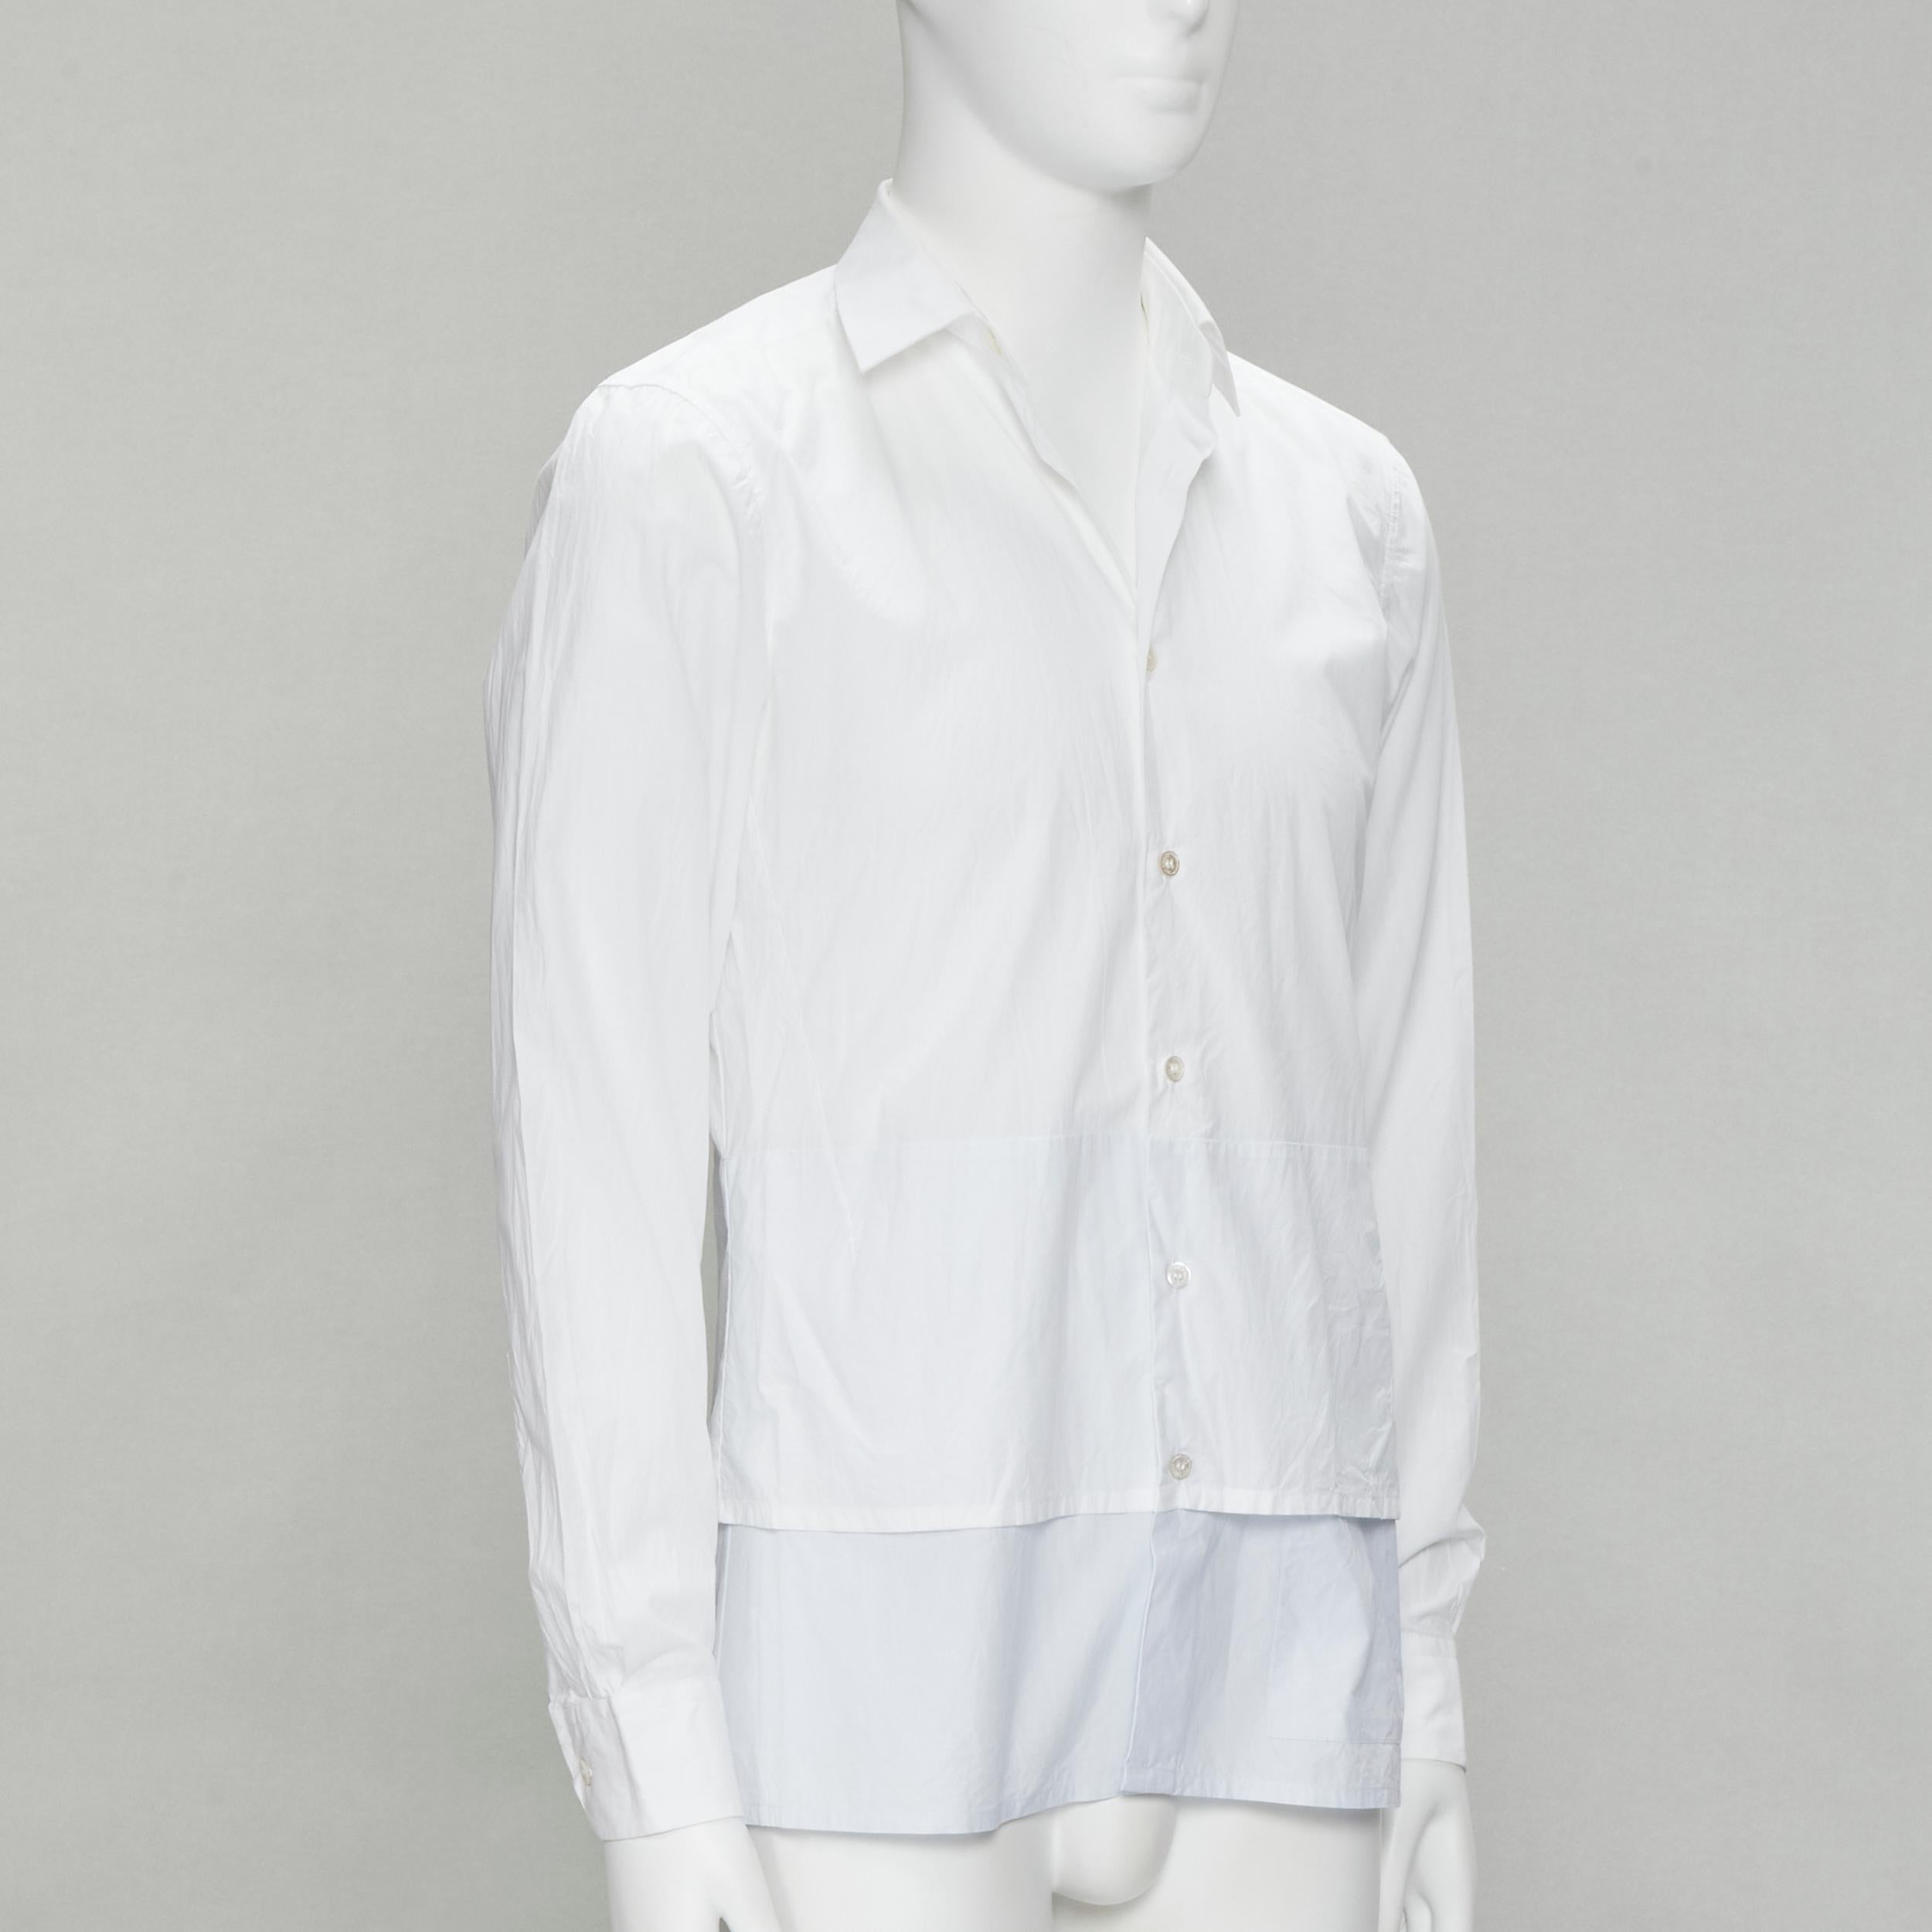 RAF SIMONS white extended layered hem deconstructed shirt EU44 S
Brand: Raf Simons
Designer: Raf Simons
Material: Cotton
Color: White
Pattern: Solid
Extra Detail: Button pocket detail at front left hem.
Made in: Romania

CONDITION:
Condition: